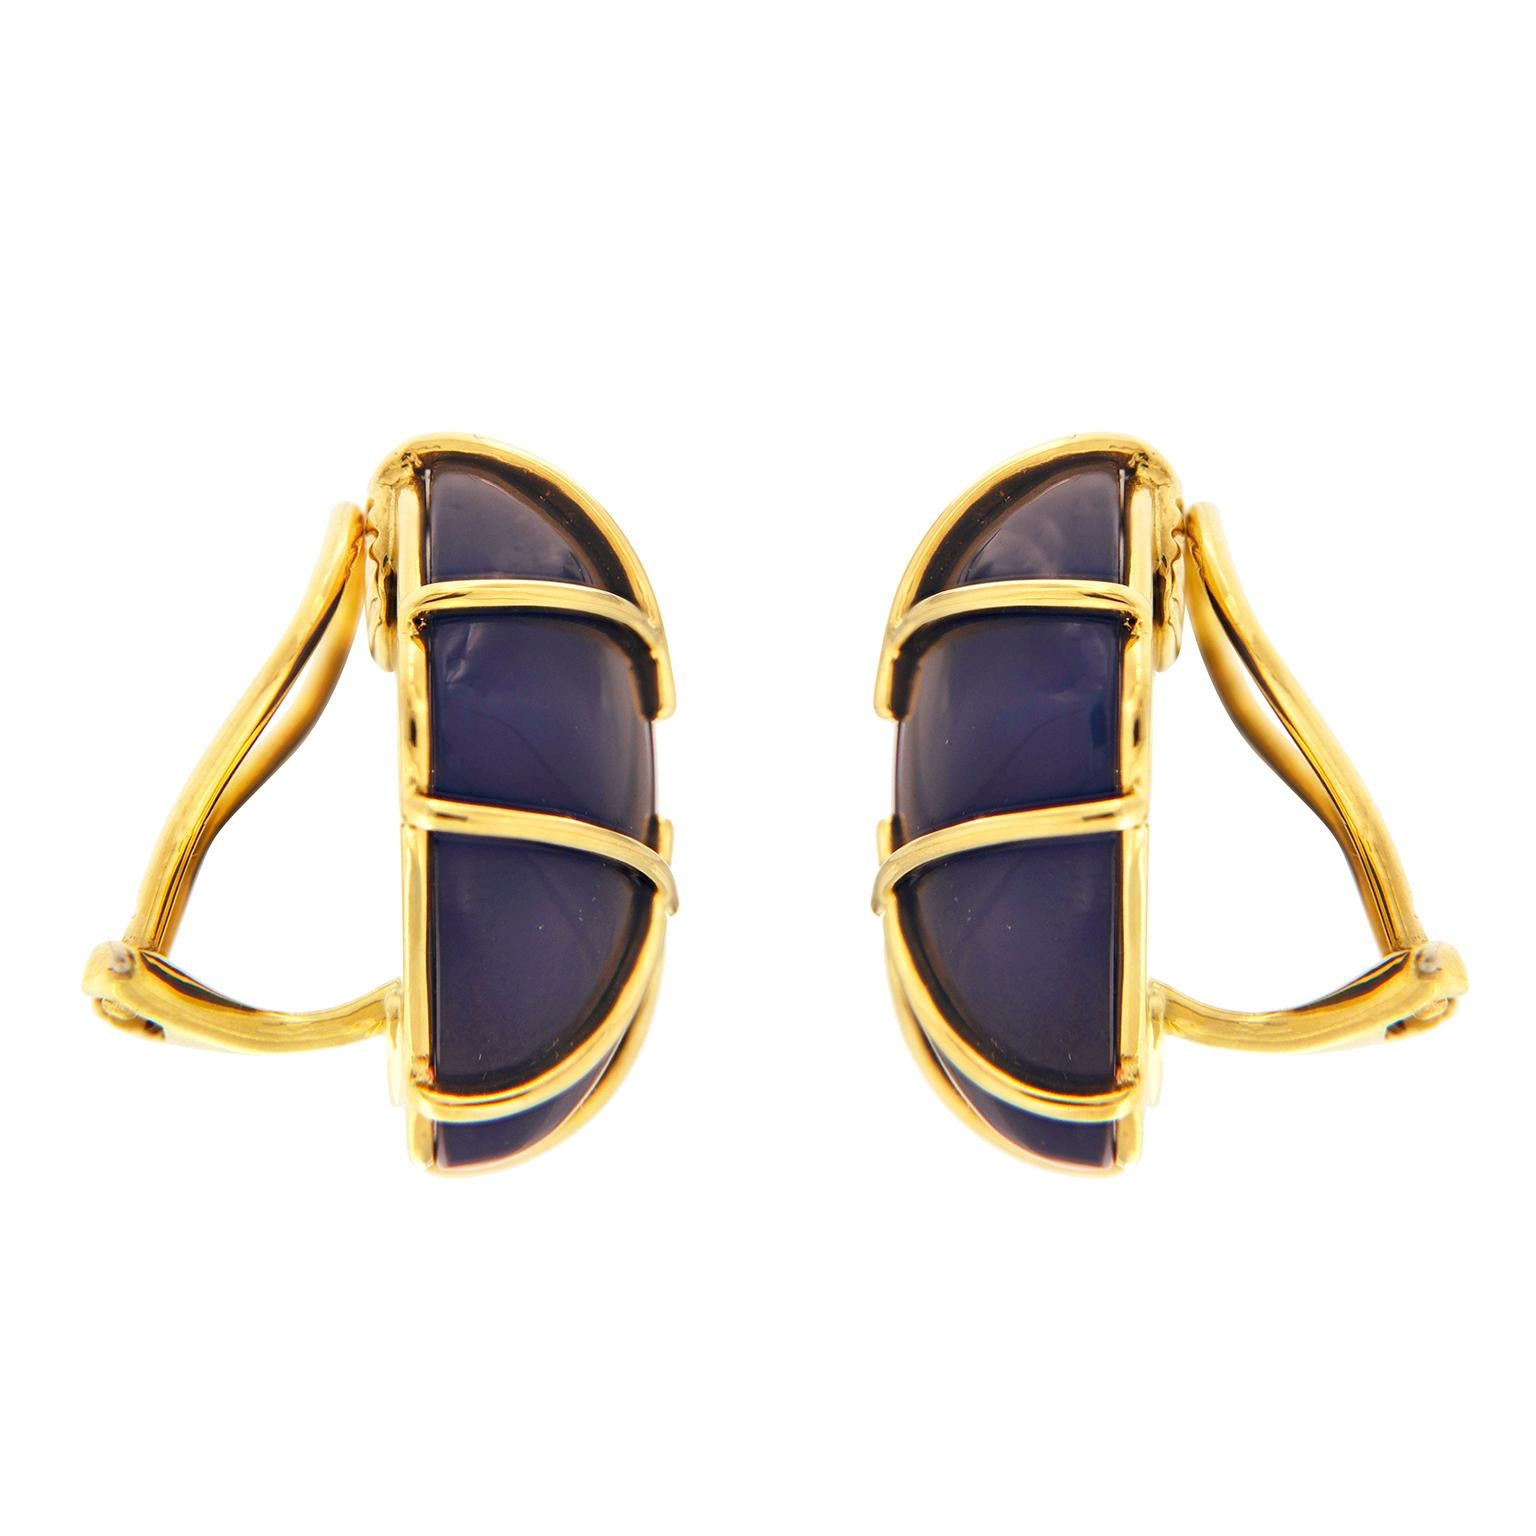 Gleaming blue agate is amplified by gold. A cushion-shaped cabochon of the gem is the base. Sleek 18k yellow gold bars overlap in a tic-tac-toe pattern, while also giving the illusion of an accent cornered square in the center. The total weight of